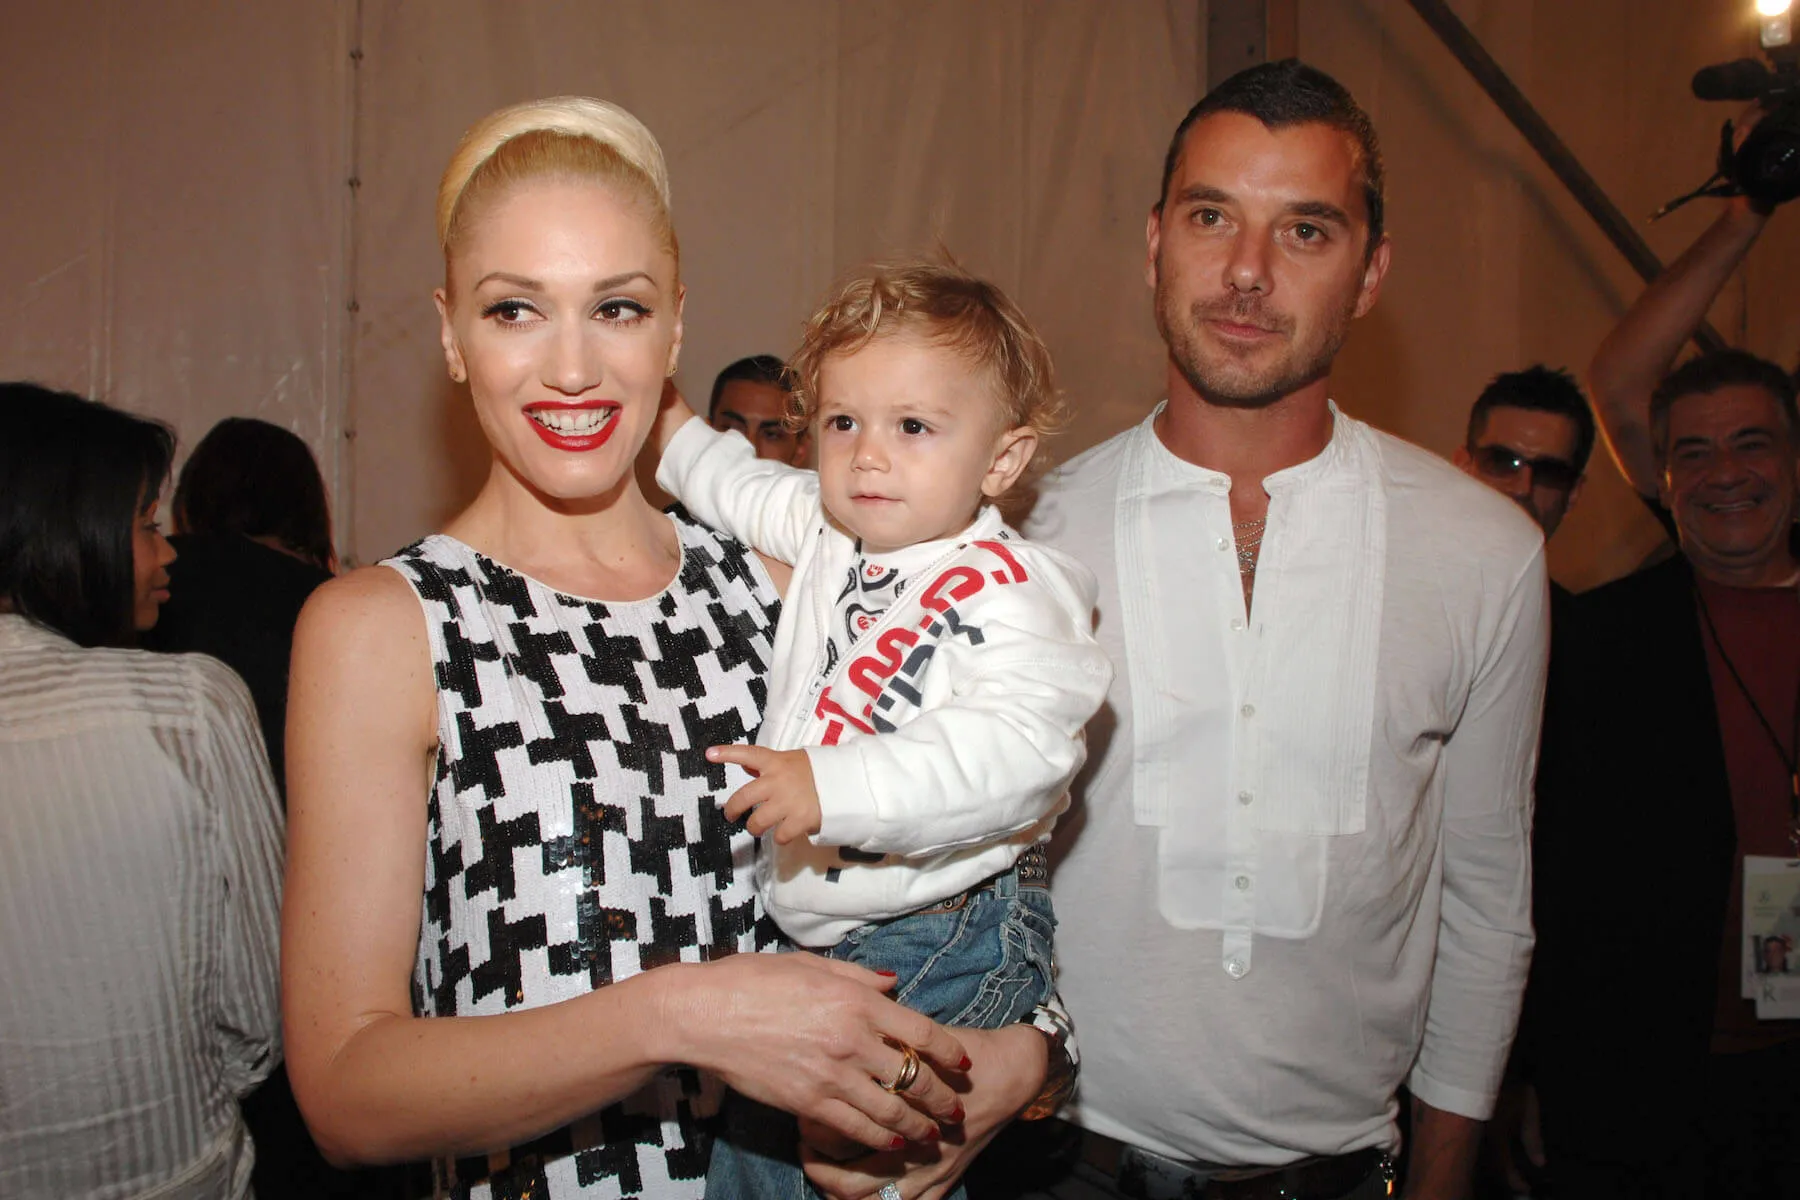 Gwen Stefani holding her child, Kingston, as a baby, with Gavin Rossdale beside her in 2007